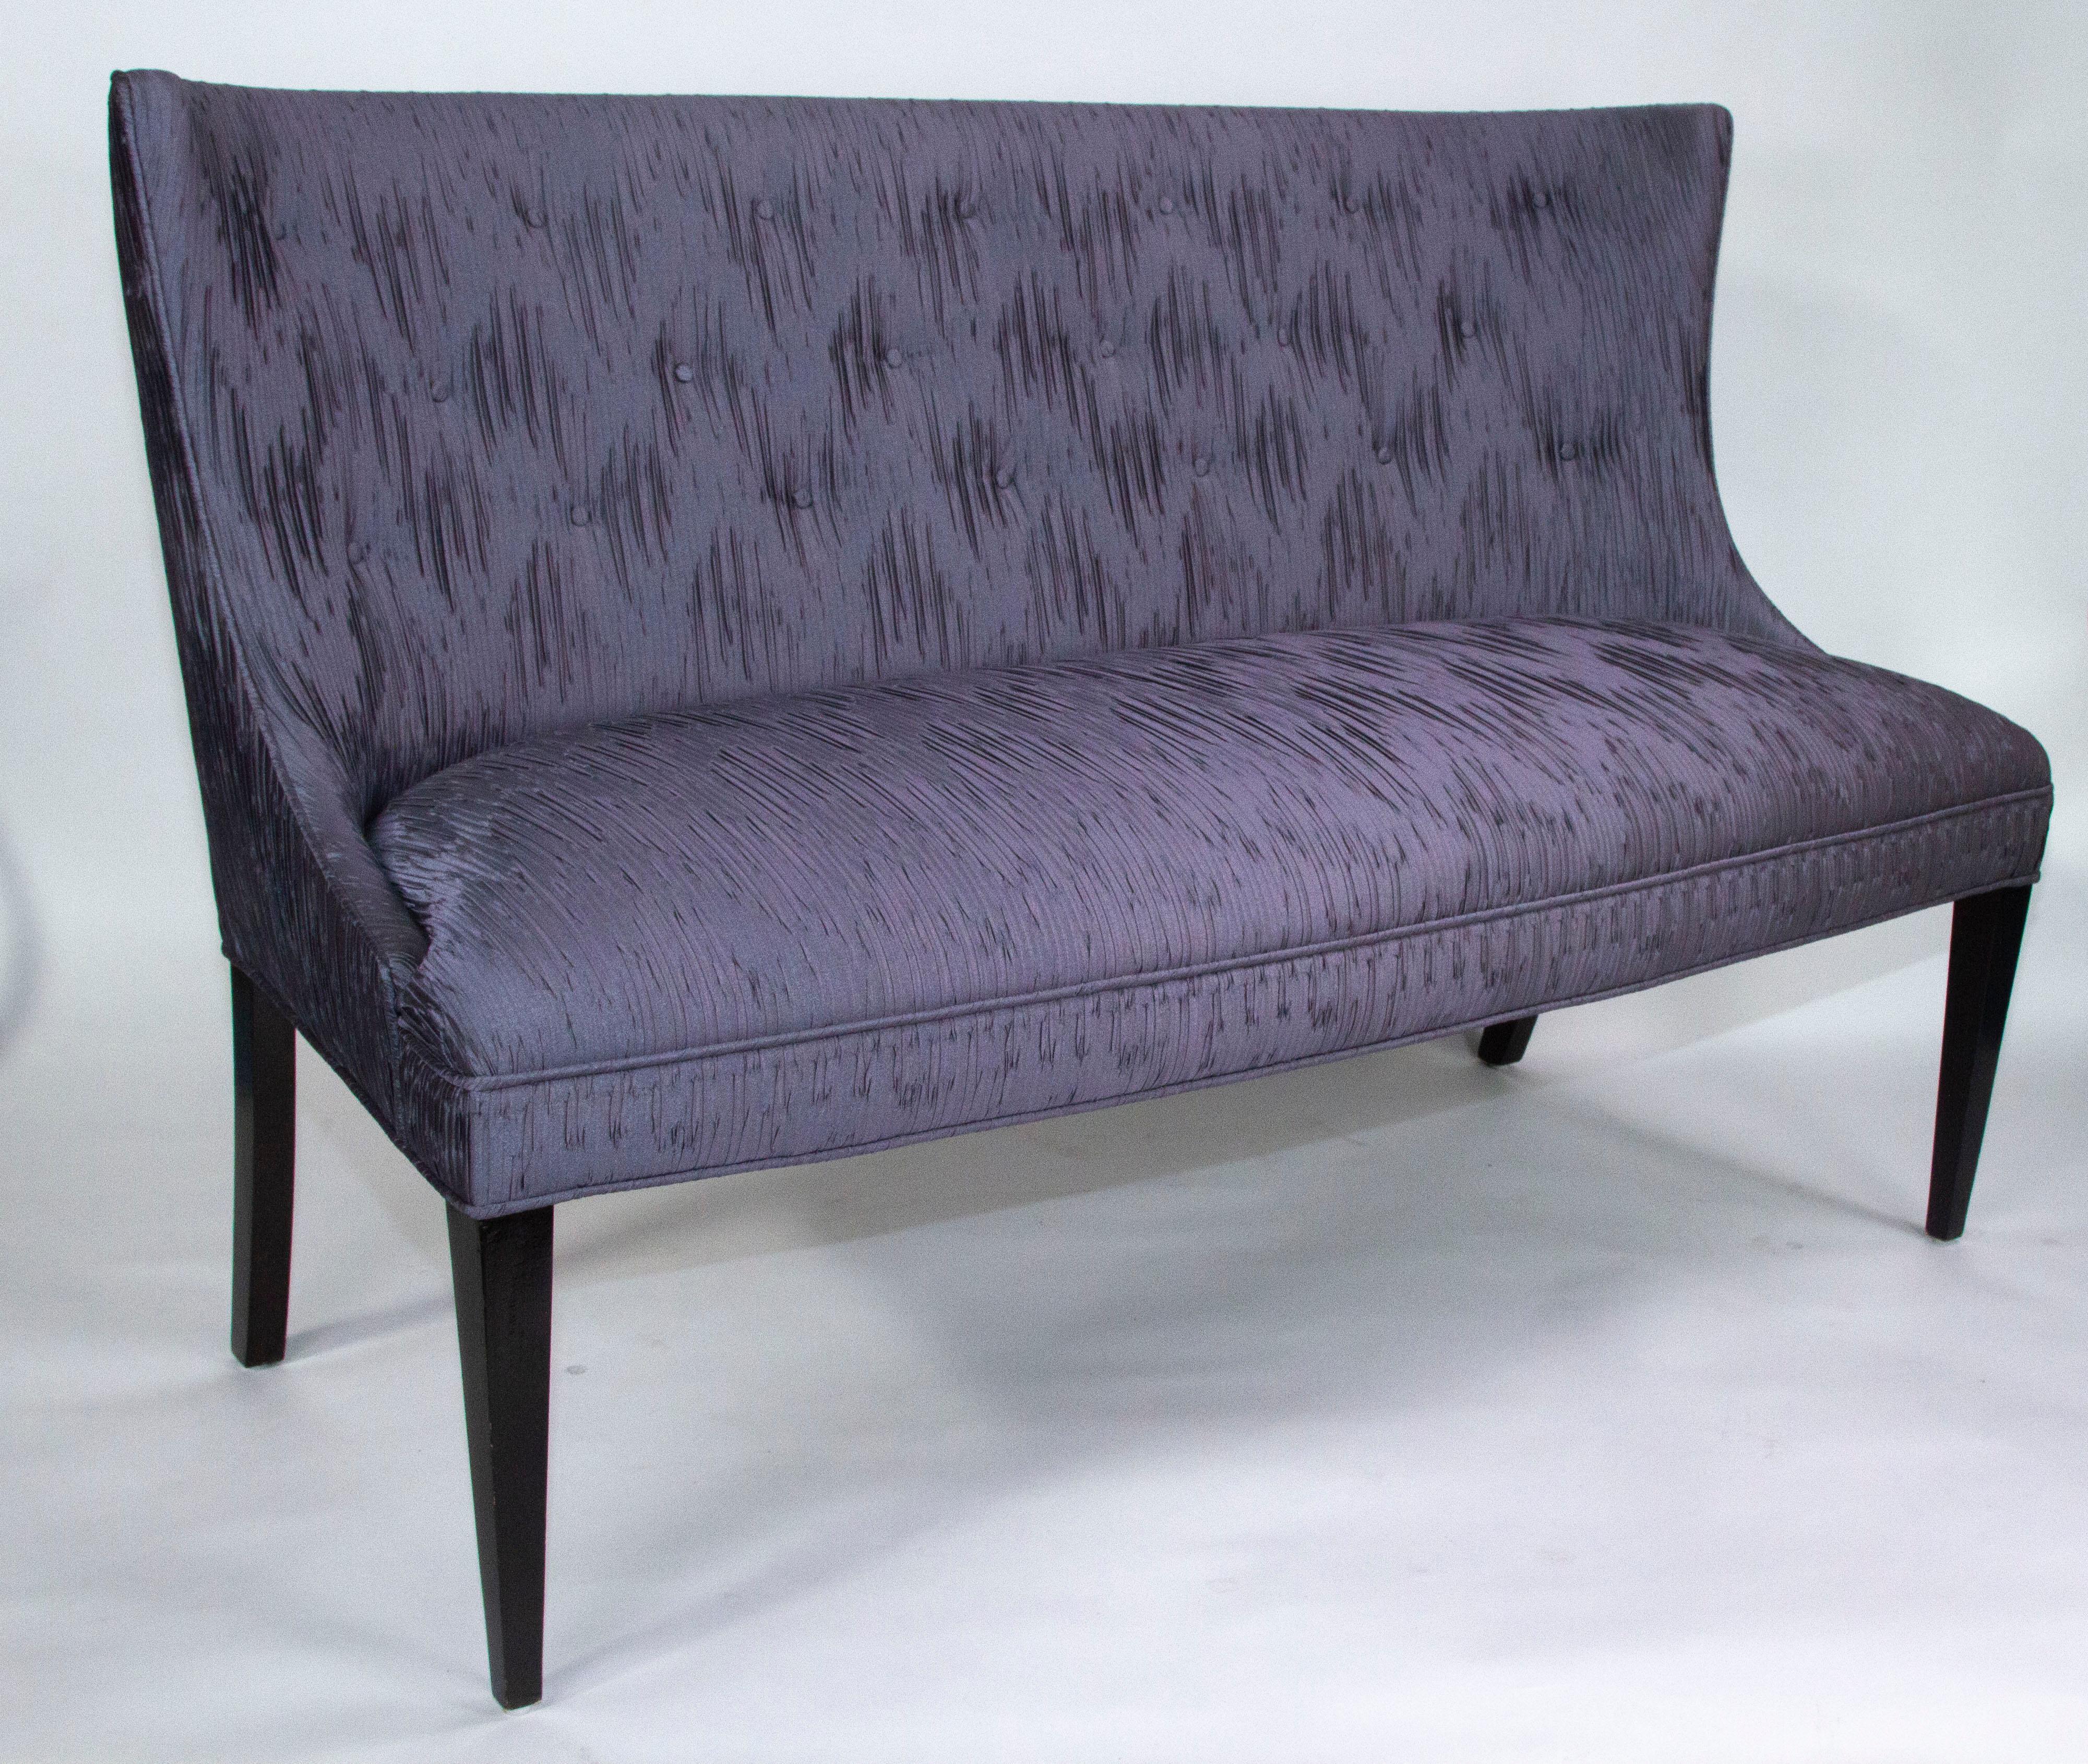 French settee 1940's style with Tufted Back and Tapered Legs For Sale 1